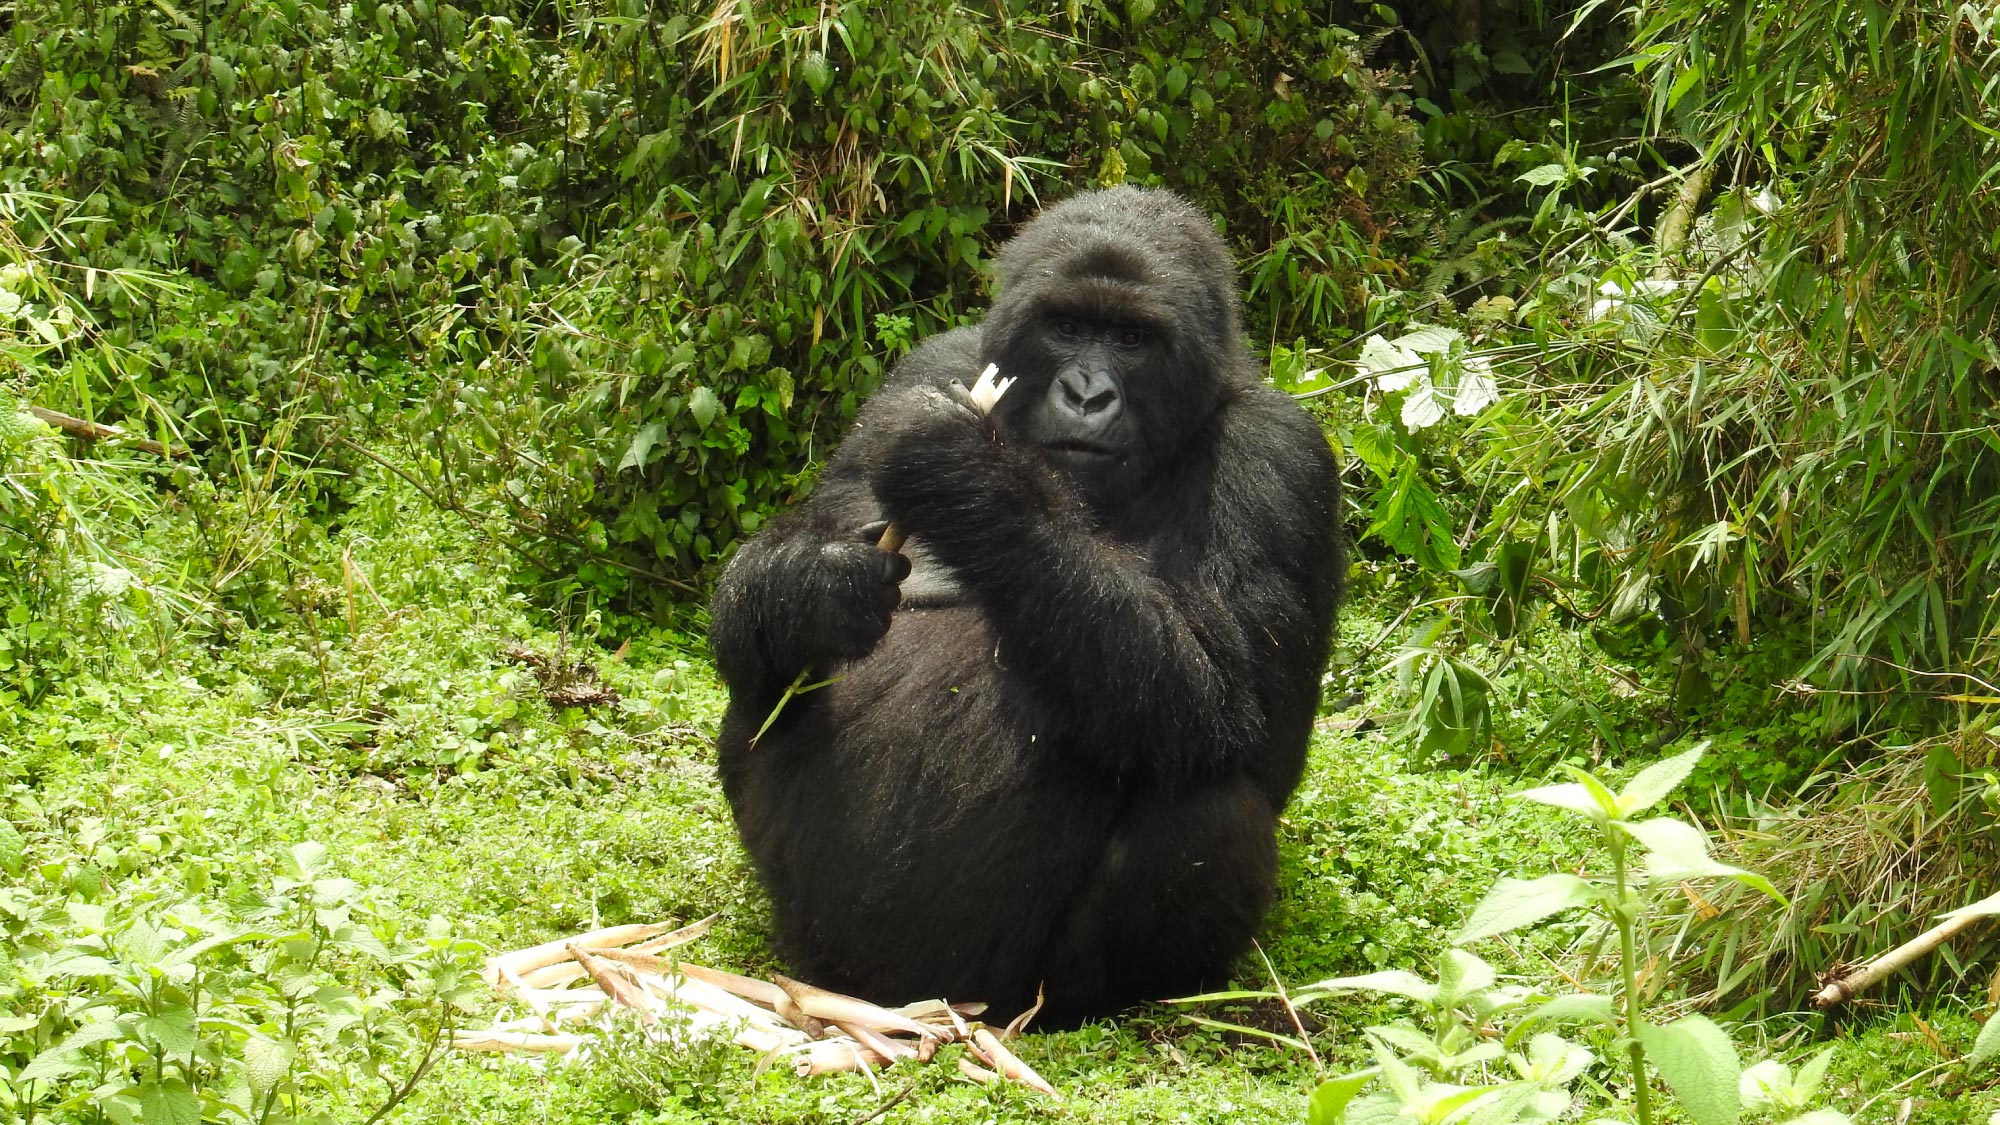 Experience the awe-inspiring adventure of gorilla trekking in Rwanda, where visitors can observe these majestic primates in their natural habitat, surrounded by lush green forests and captivating landscapes.